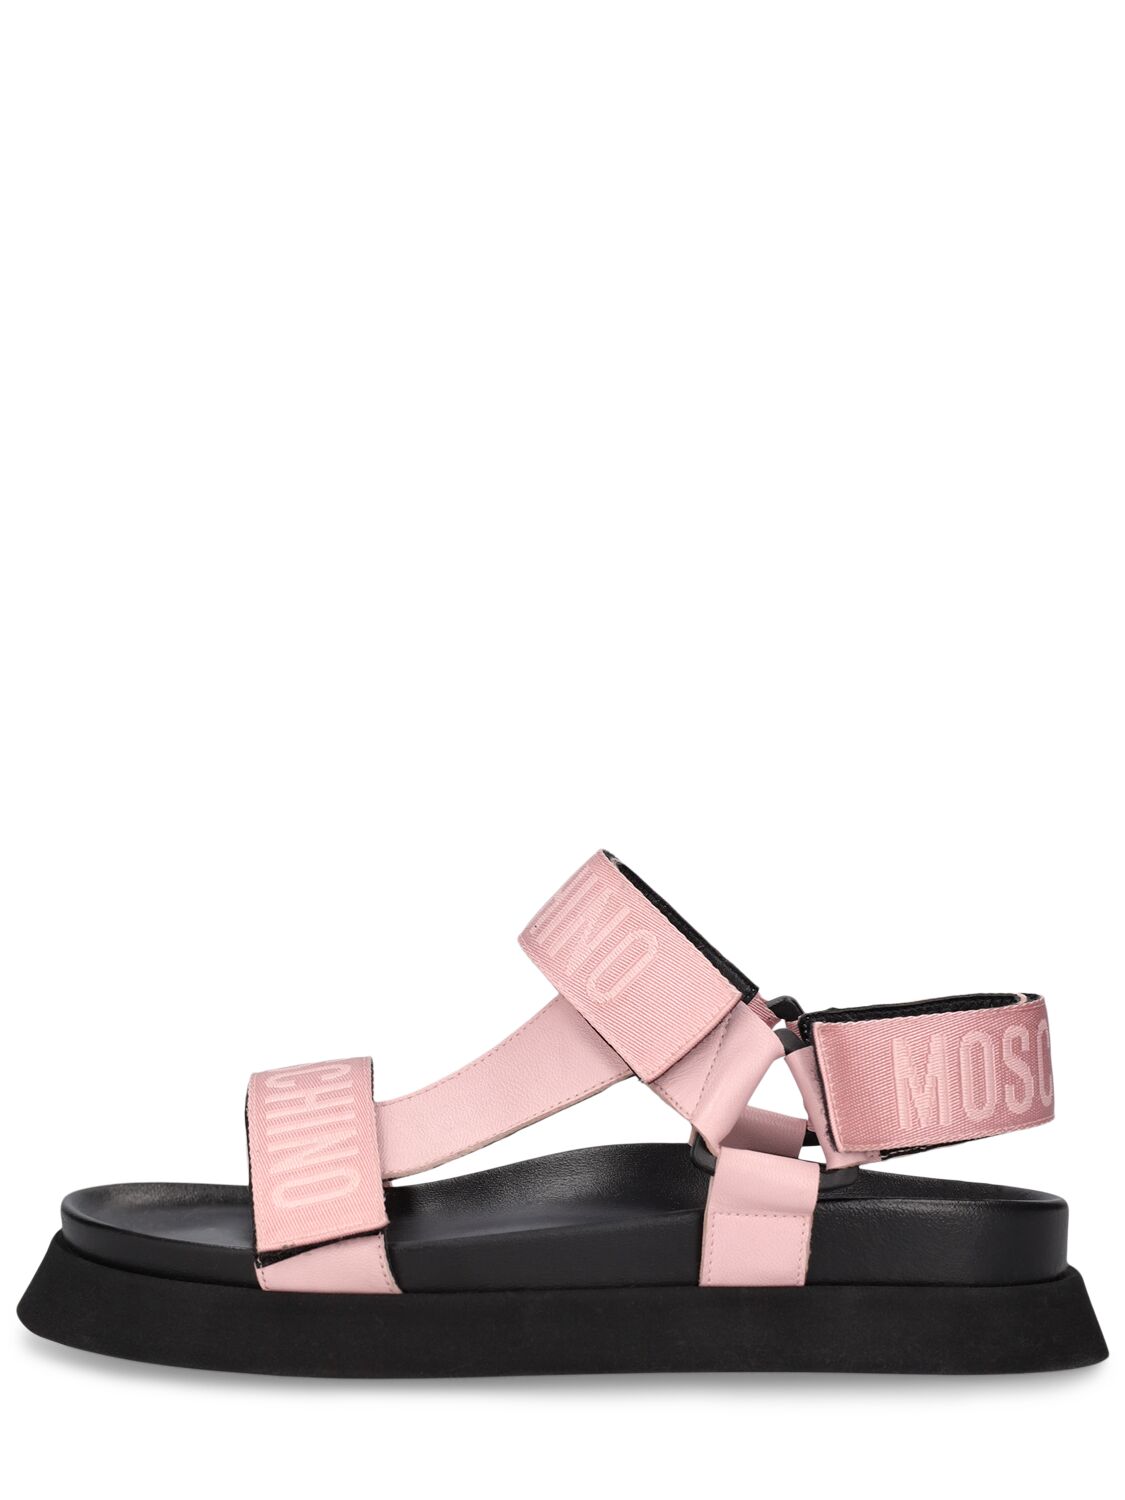 Moschino 40mm Tech Flat Sandals In Pink